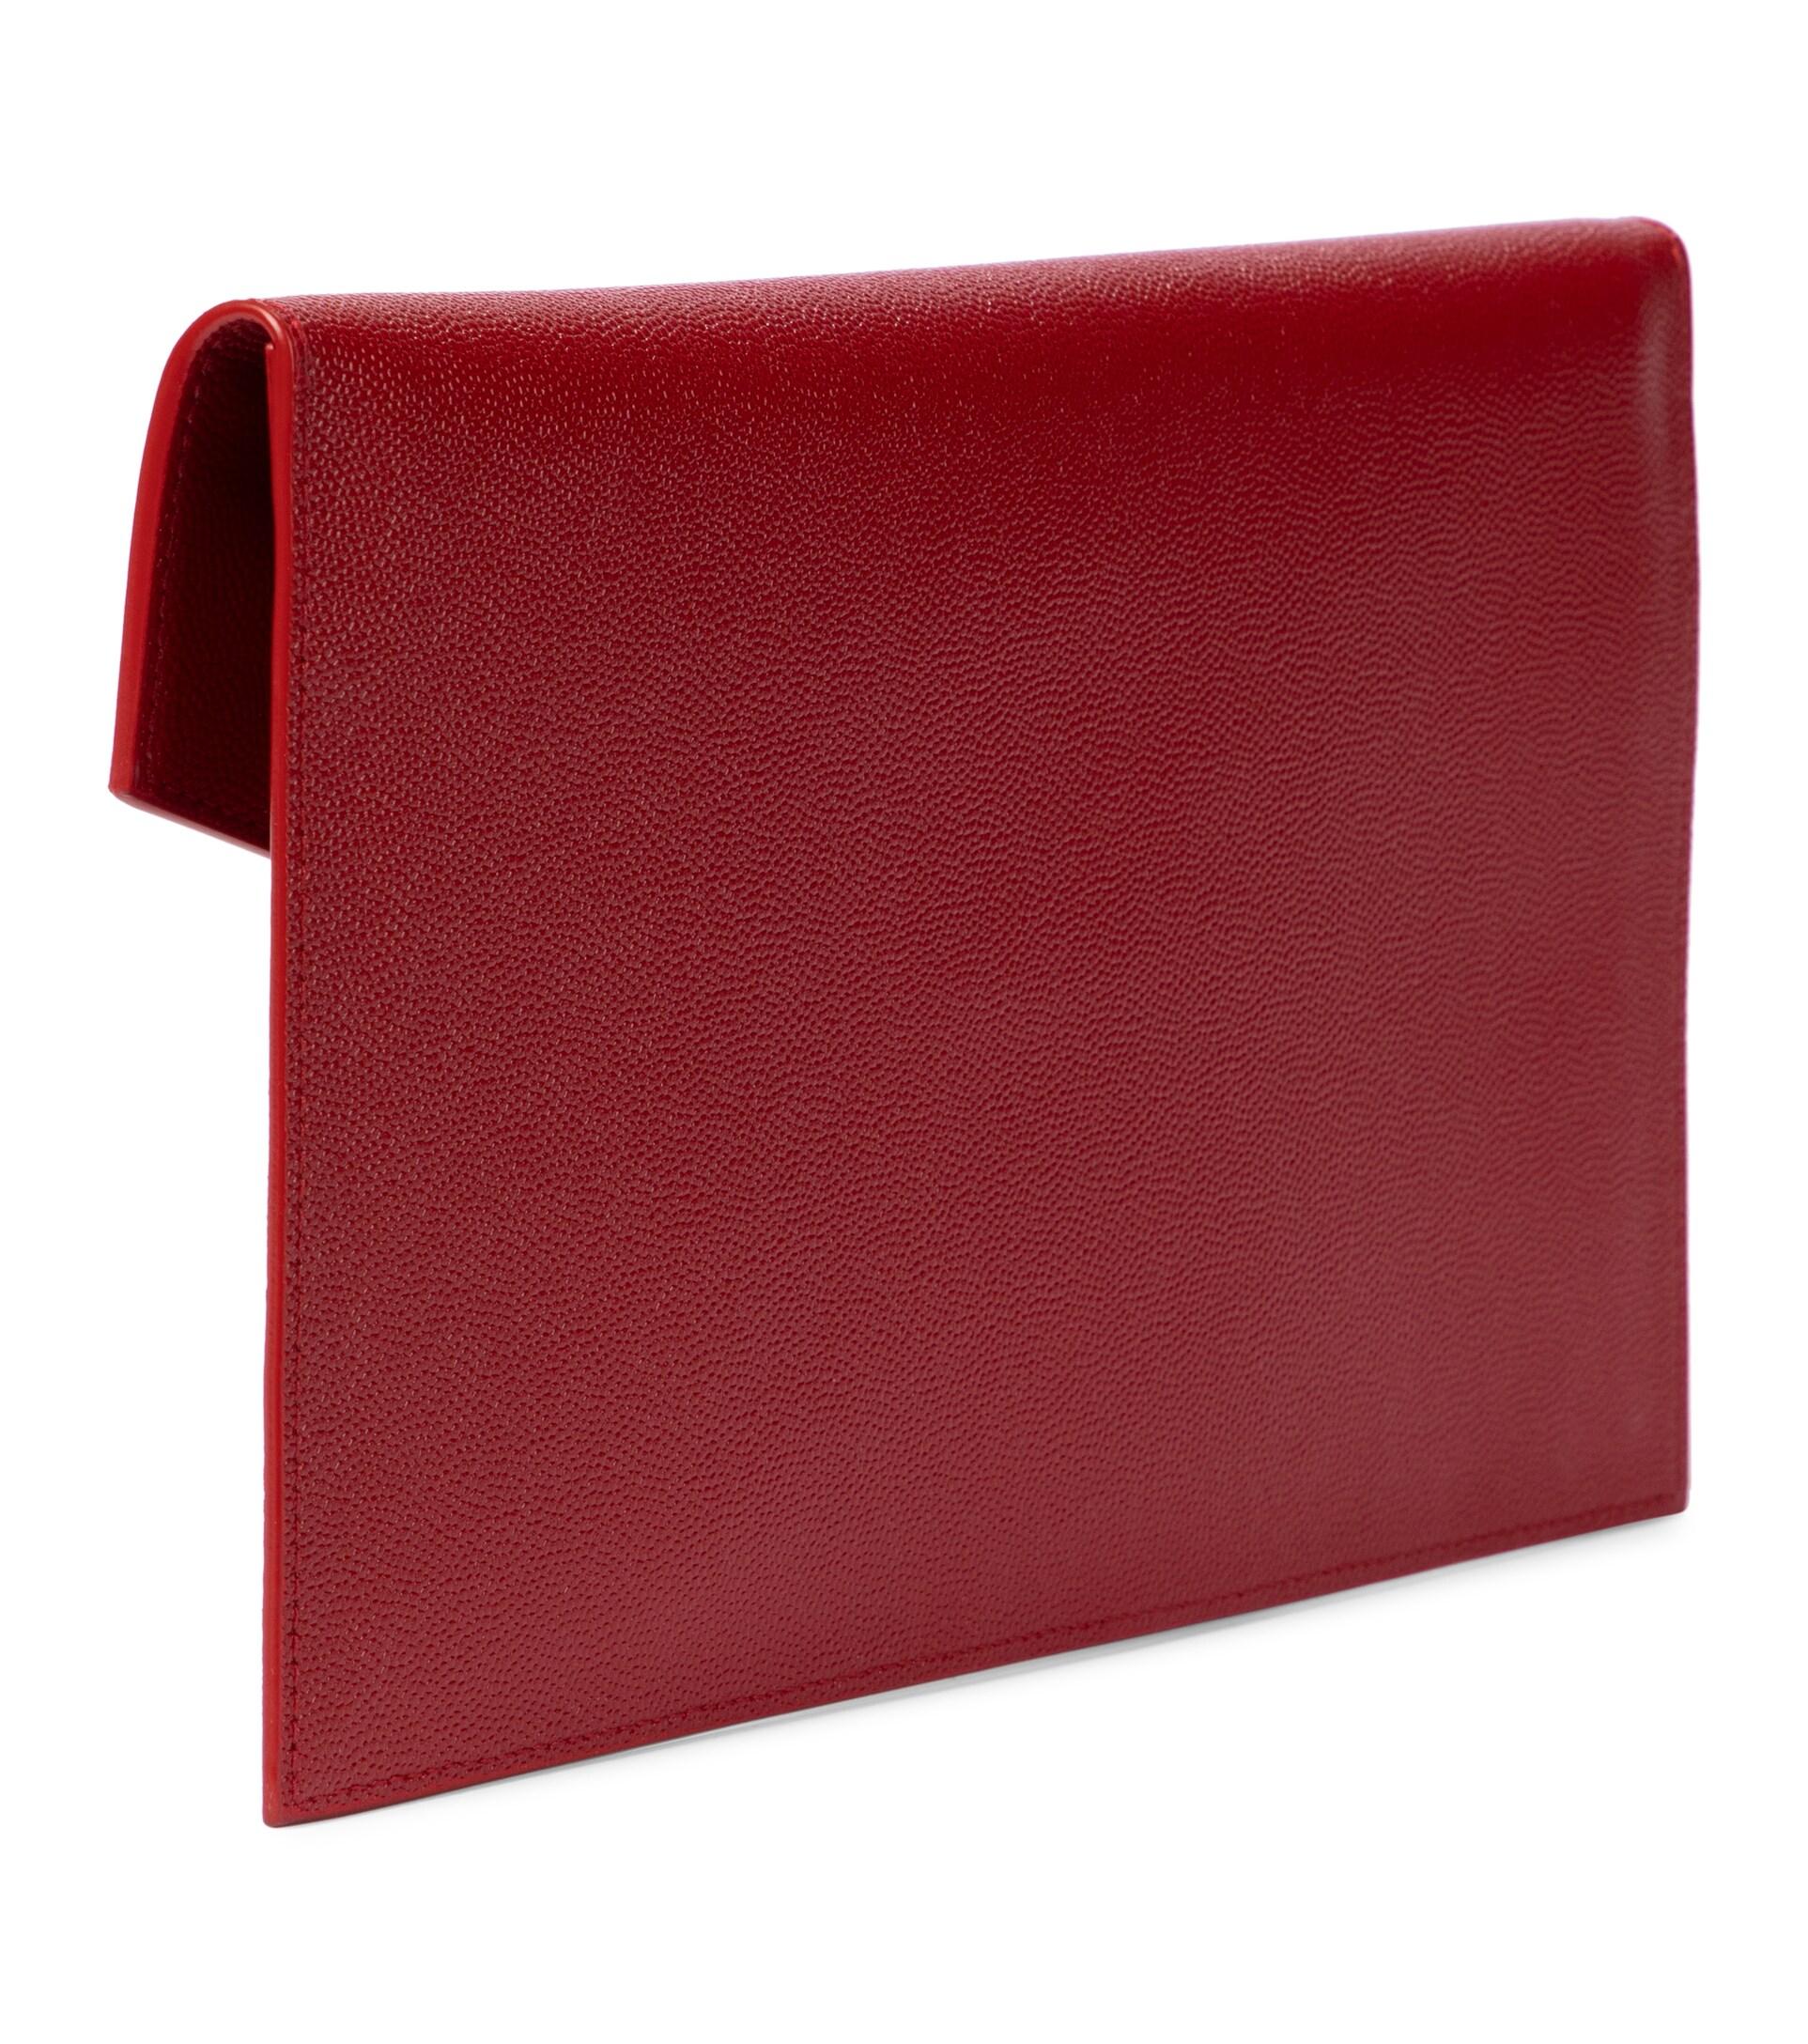 Uptown leather clutch bag Saint Laurent Red in Leather - 27465763